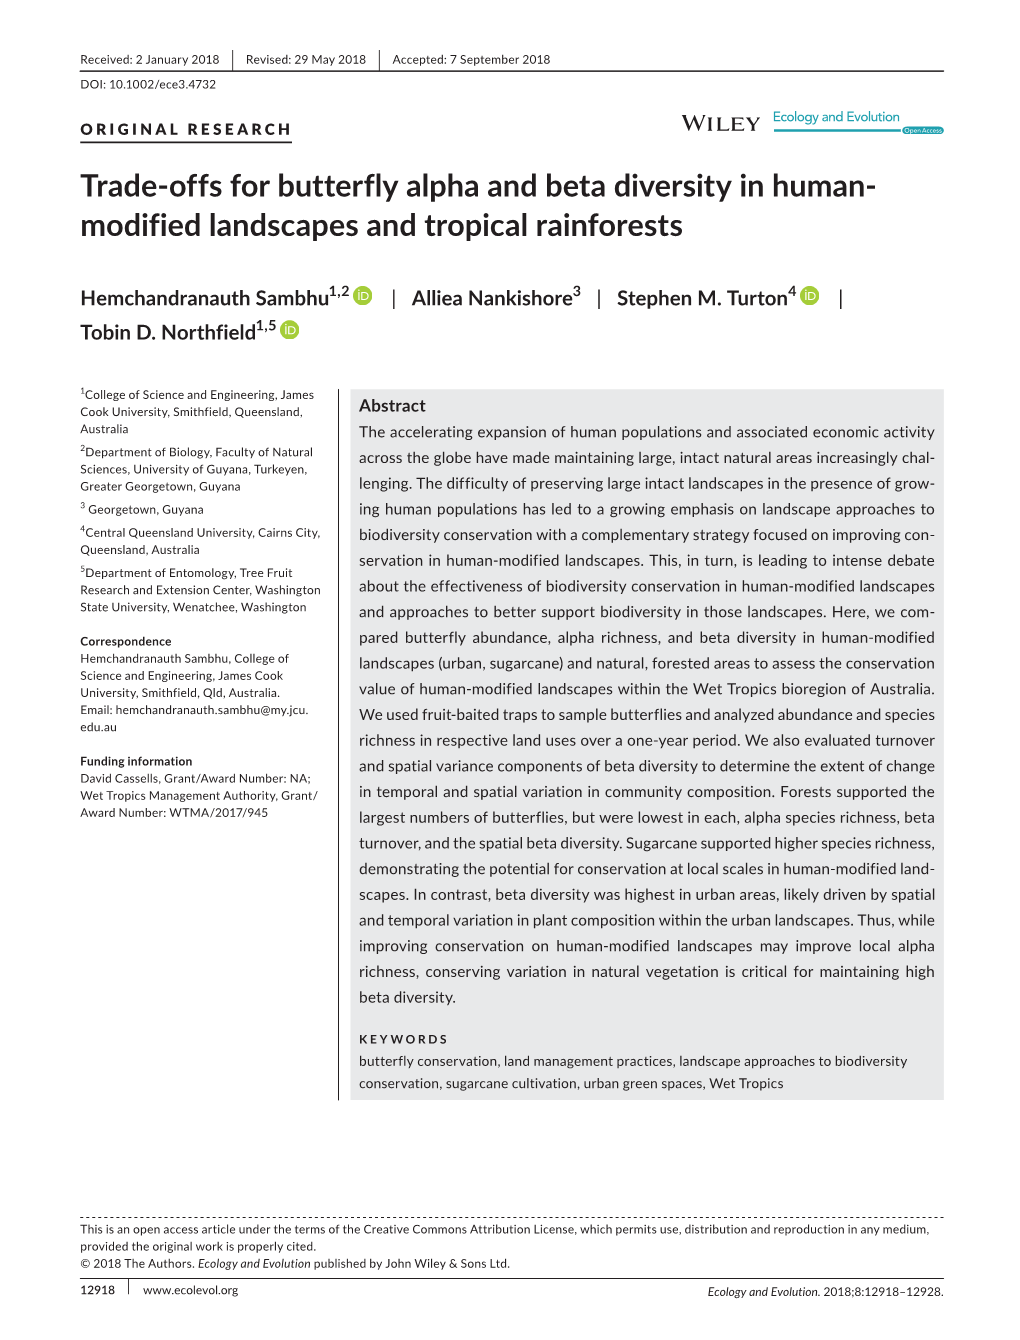 Offs for Butterfly Alpha and Beta Diversity in Human‐ Modified Landscapes and Tropical Rainforests